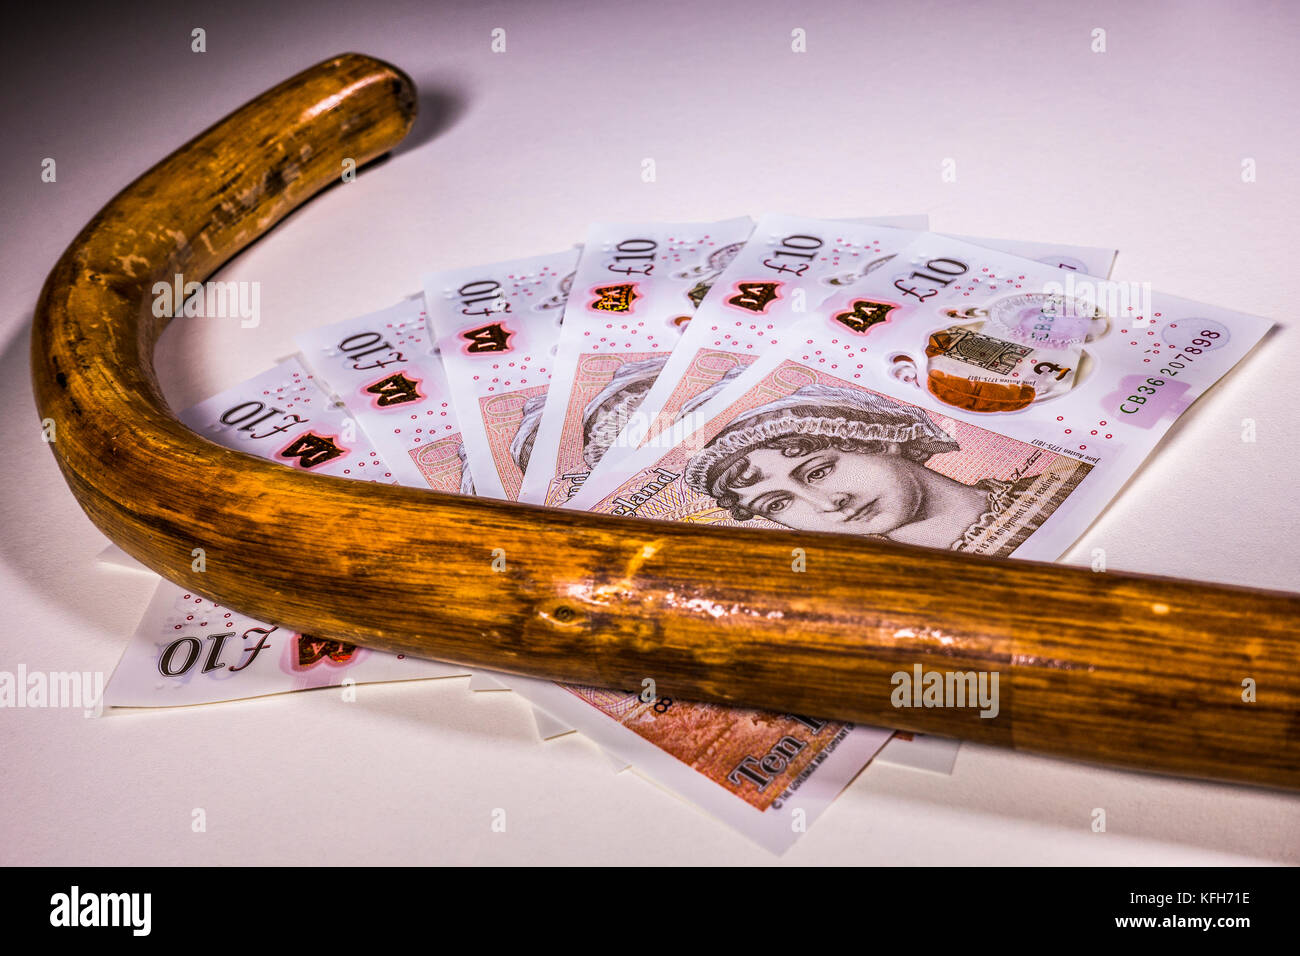 Walking stick / cane and new sterling £10 ten pound notes. Concept of link between old age and UK pounds, such as pension income and healthcare cost. Stock Photo